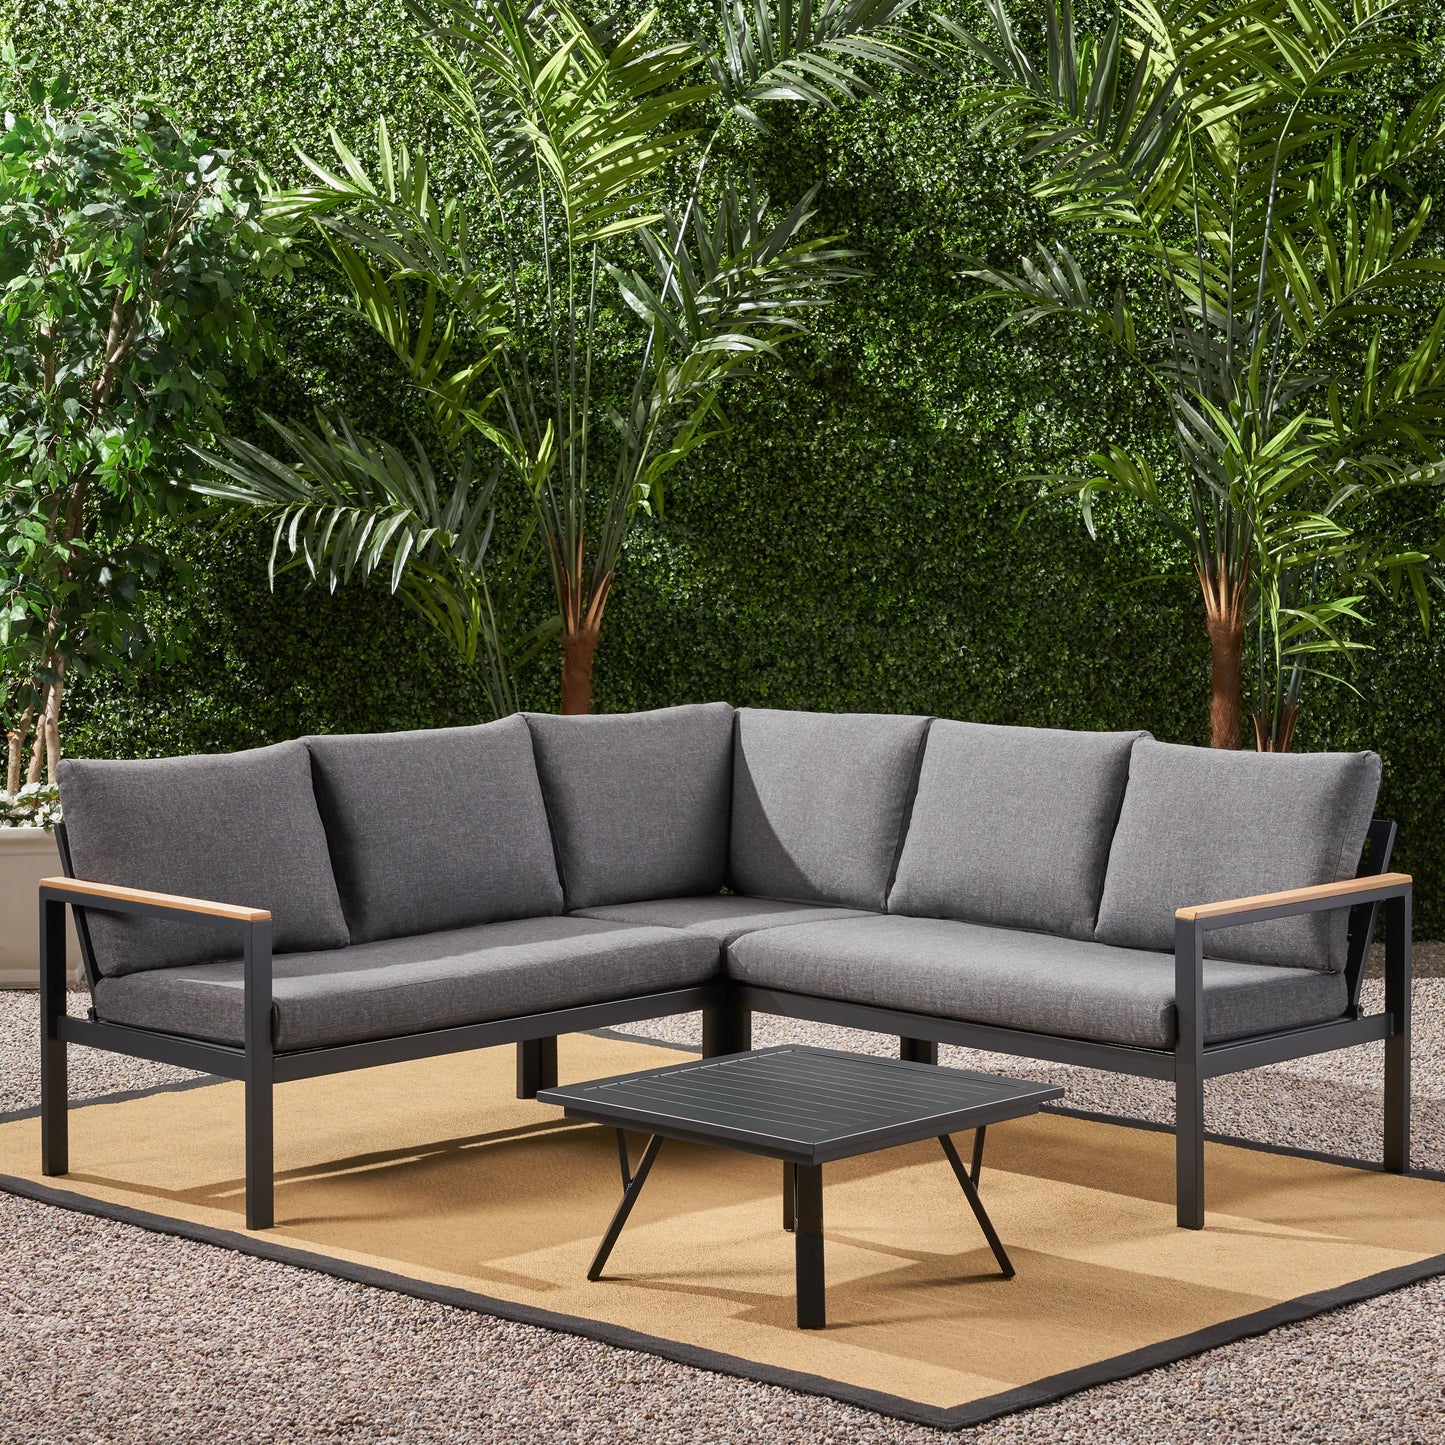 Jessica Outdoor Aluminum V-Shaped Sofa Set with Faux Wood Accents, Gray Finish and Gray